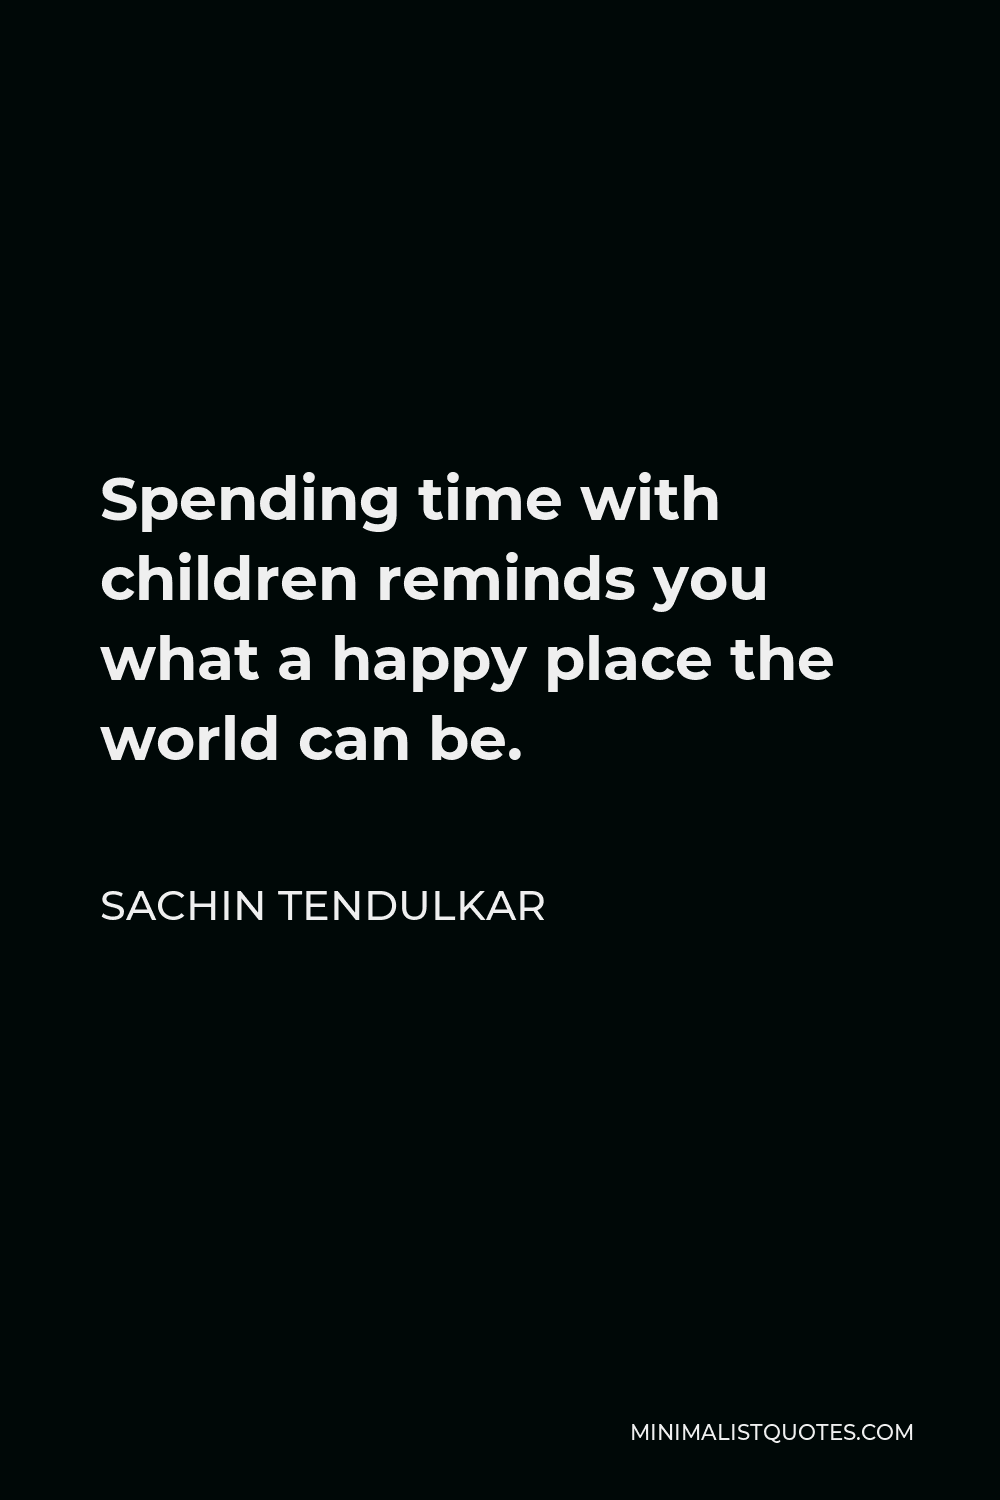 Sachin Tendulkar Quote - Spending time with children reminds you what a happy place the world can be.